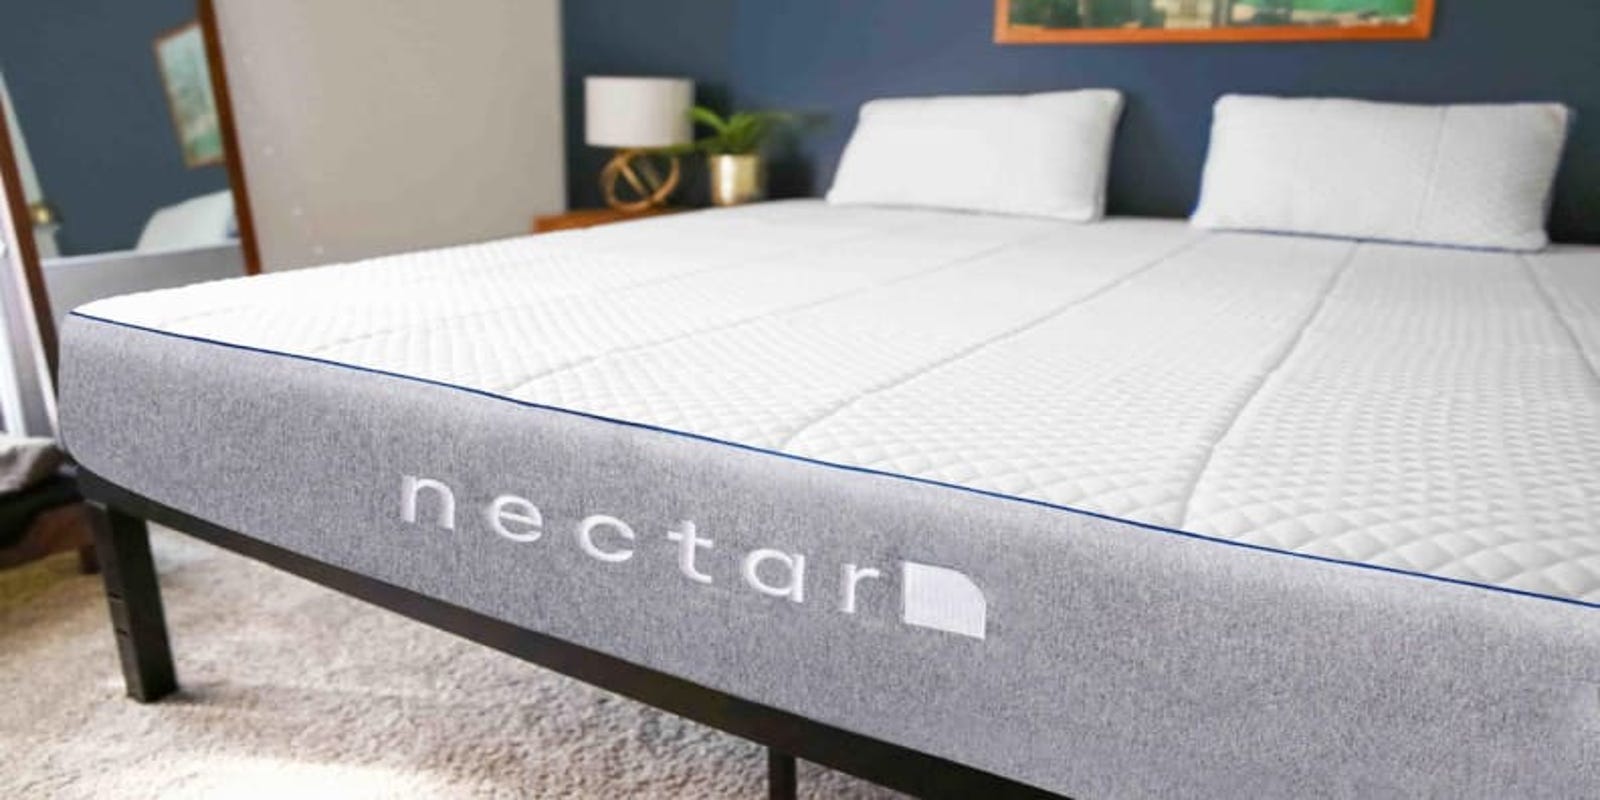 will nectar mattress have a black friday sale